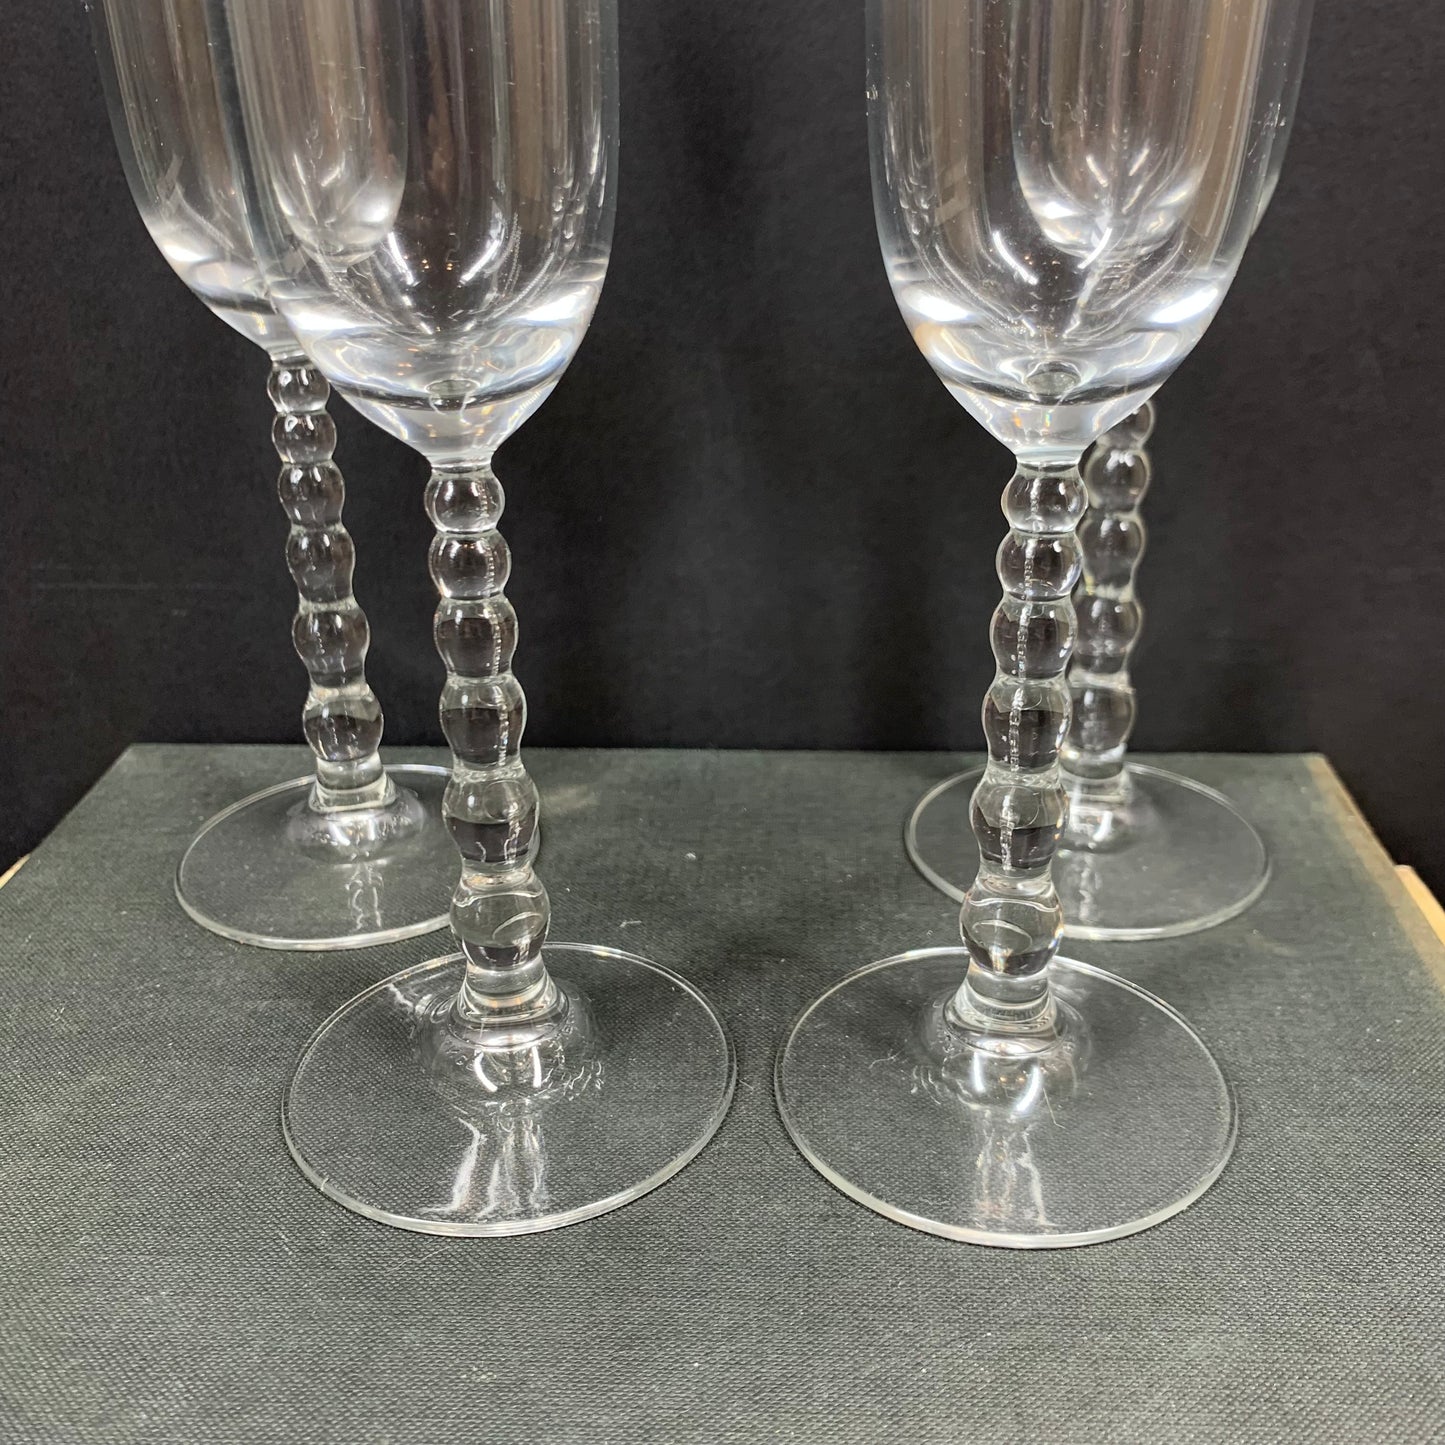 1980s Luminarc glass champagne flutes with droplet stem